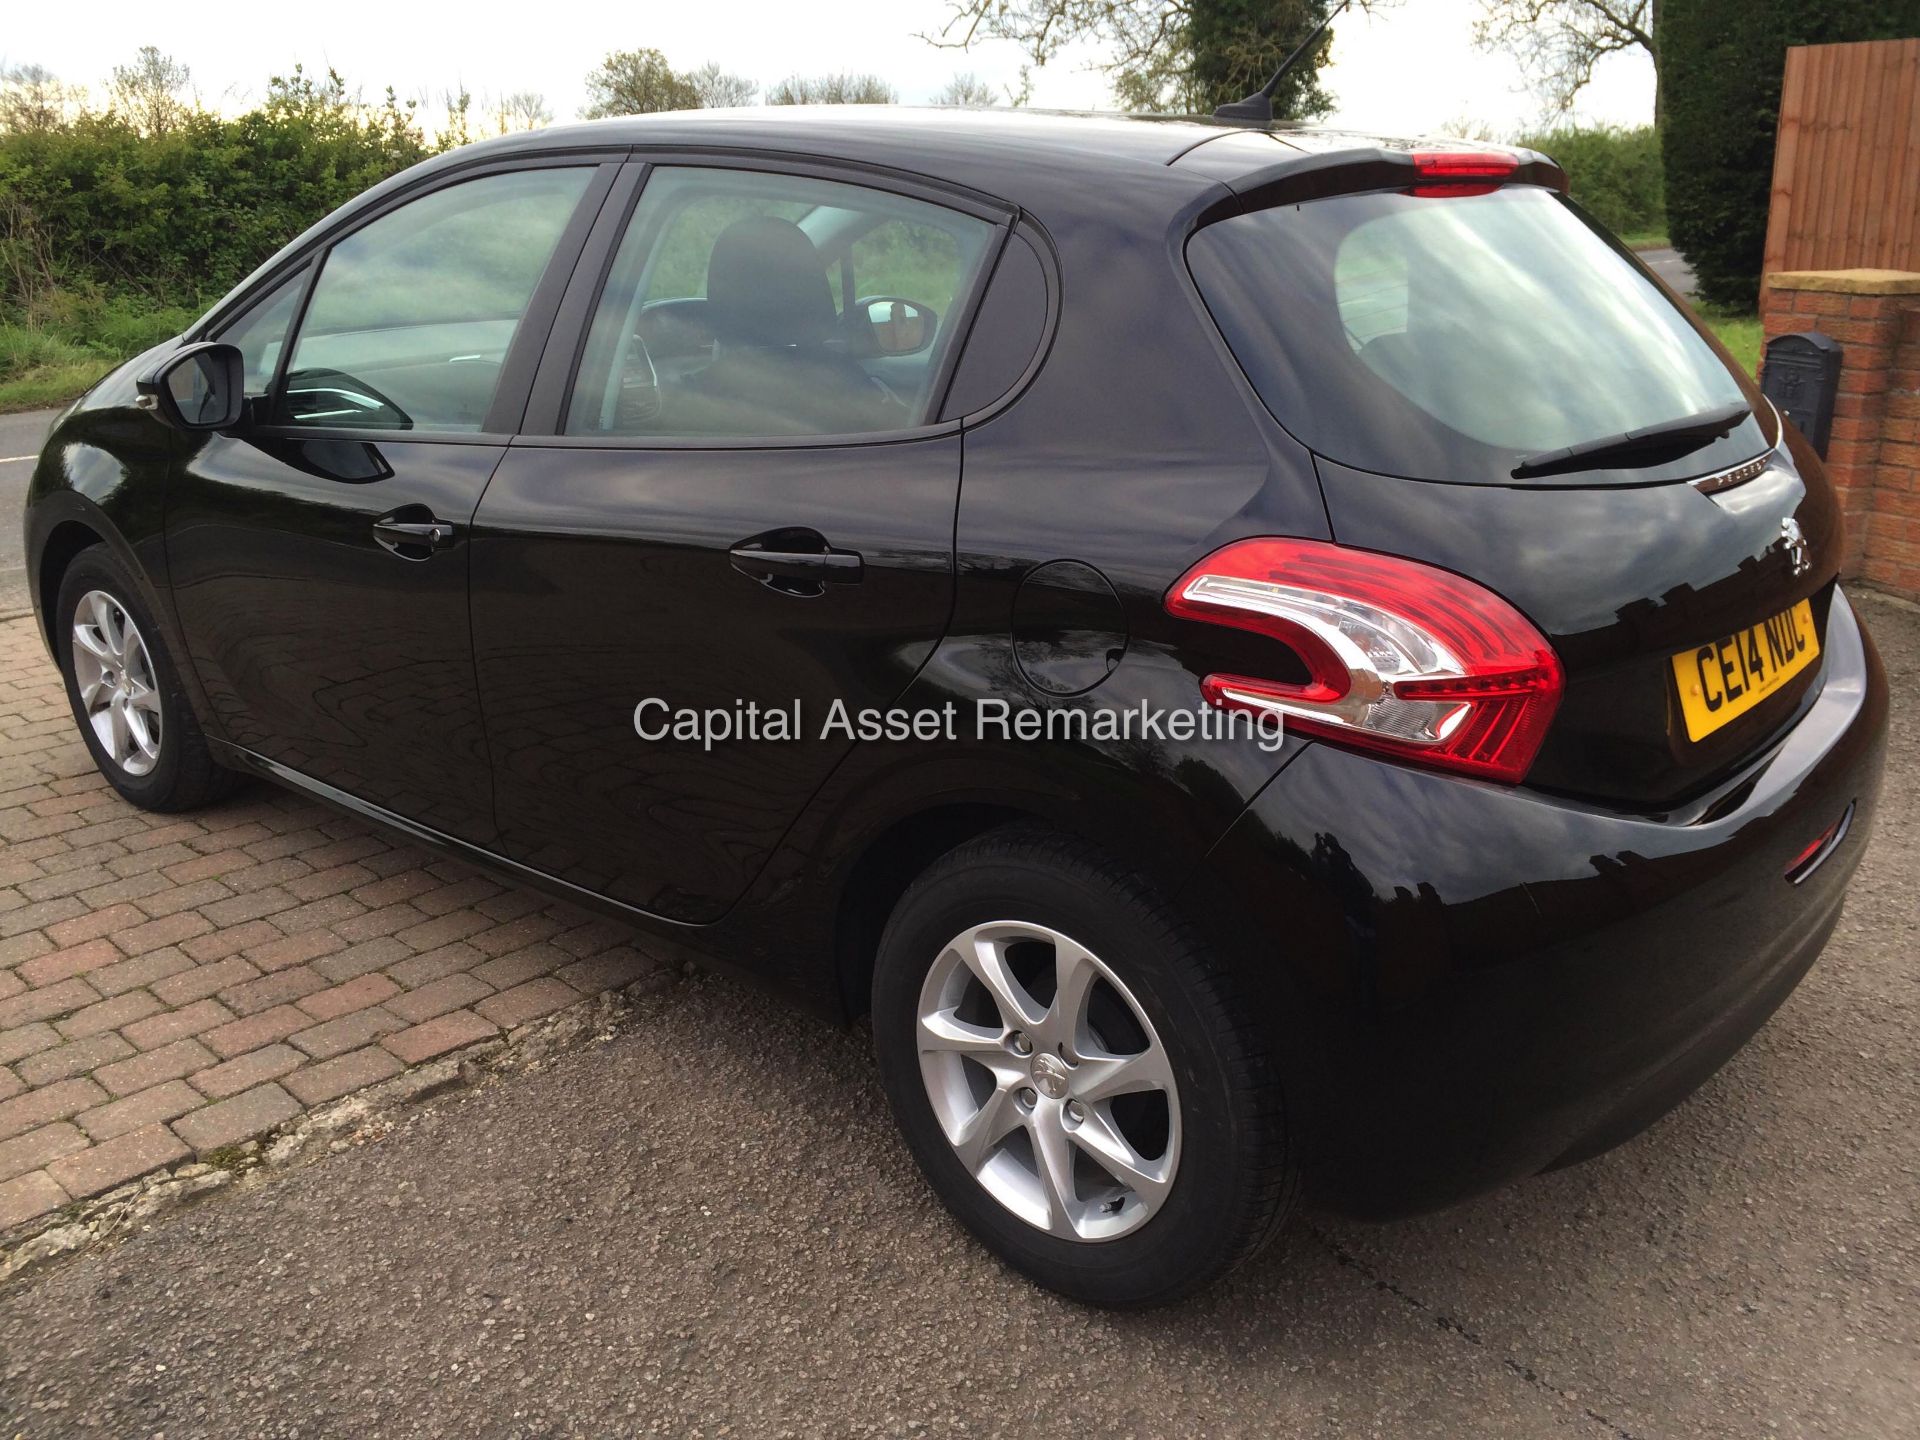 PEUGEOT 208 1.4 HDI 'ACTIVE' 5 DOOR (2014 - 14 REG)  **OWNED BY PEUGEOT FROM NEW** - Image 6 of 15